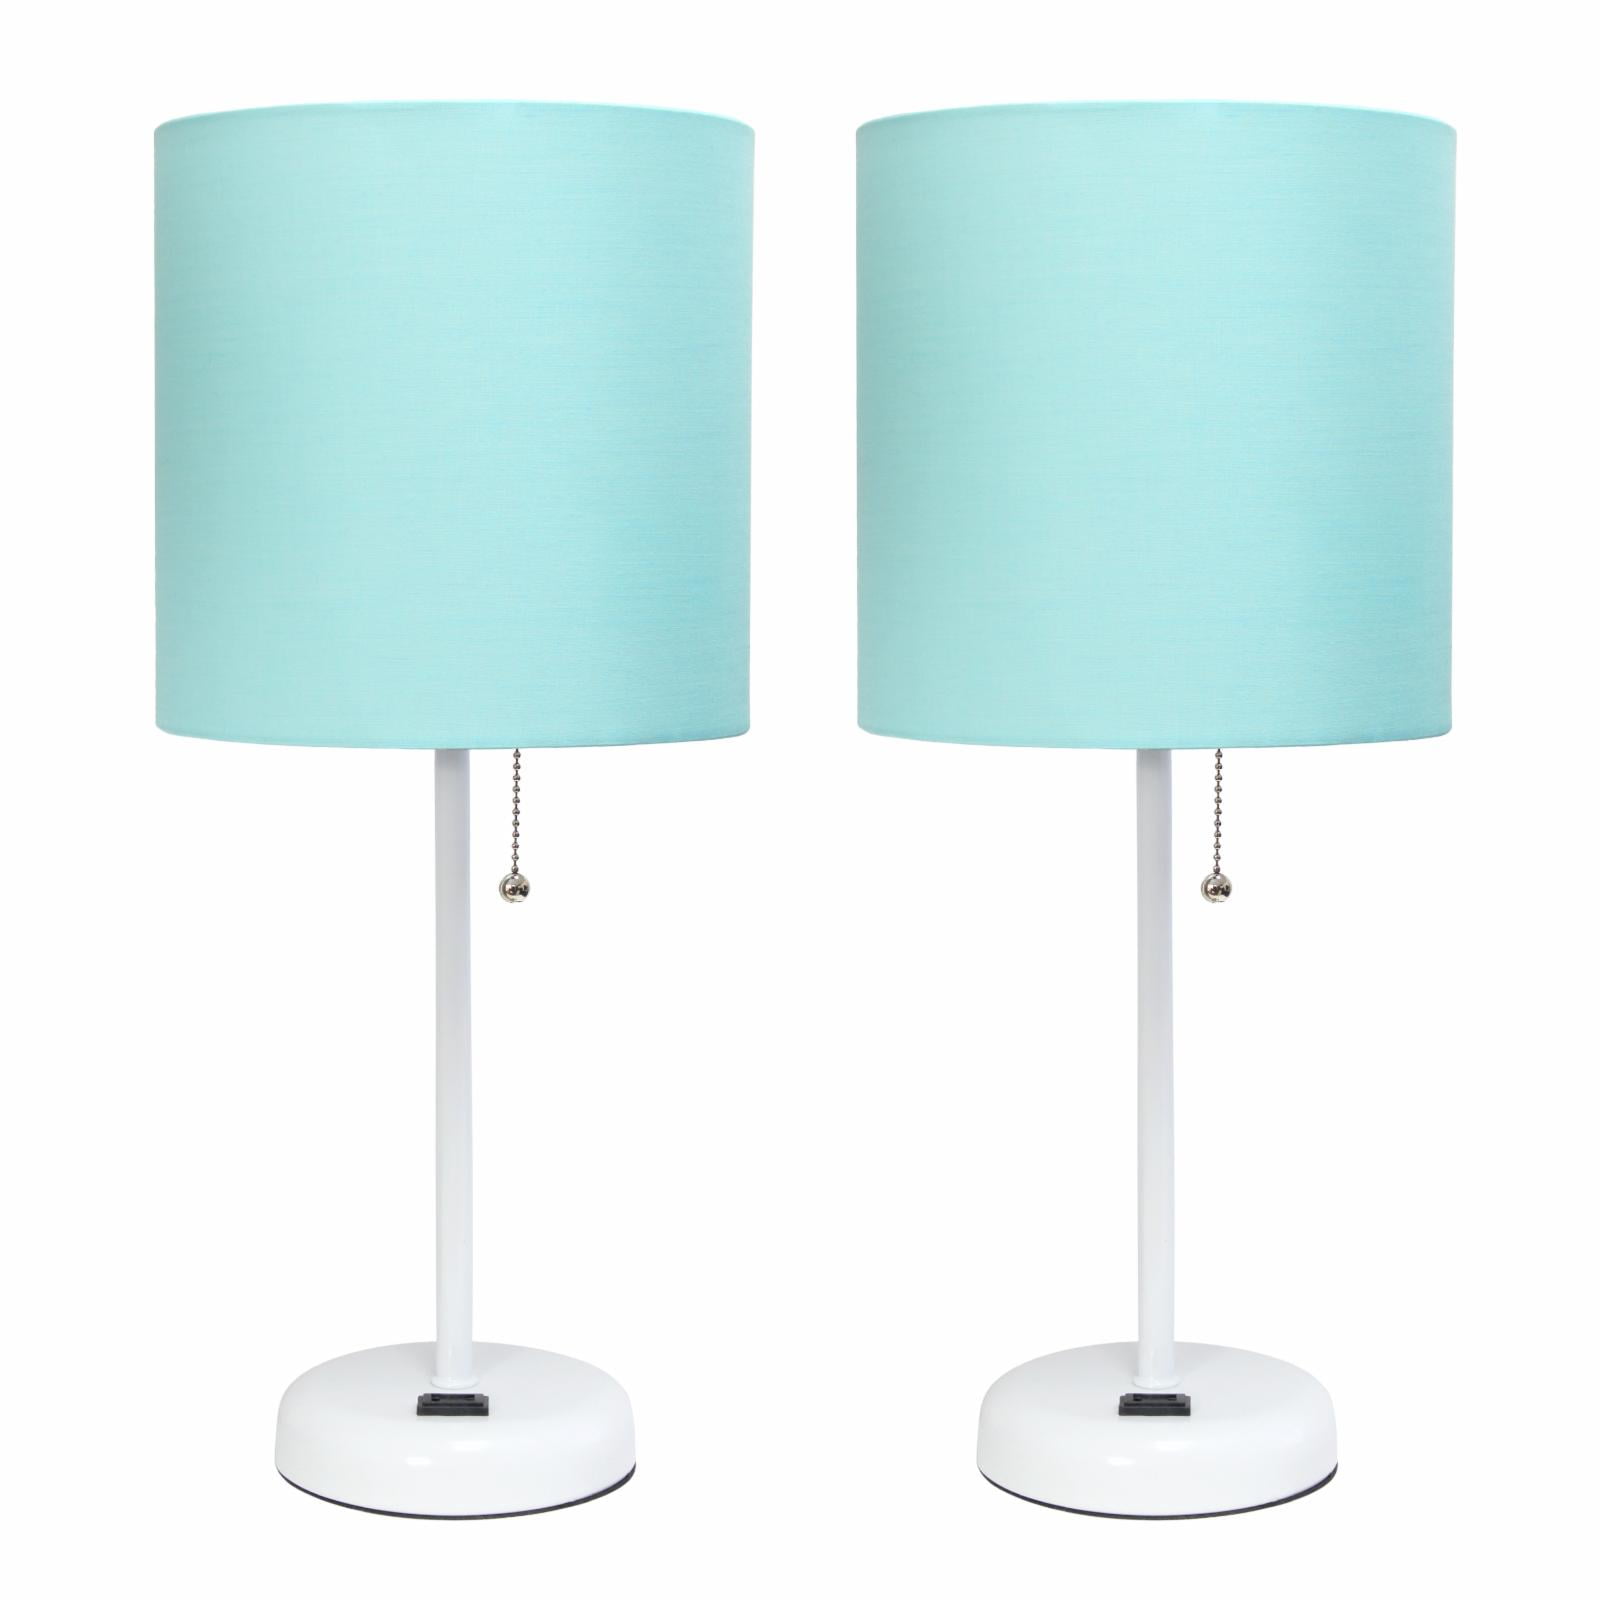 Lc2001-blu-2pk Brushed Steel Stick Table Lamp With Charging Outlet & Fabric Shade, Blue - Set Of 2